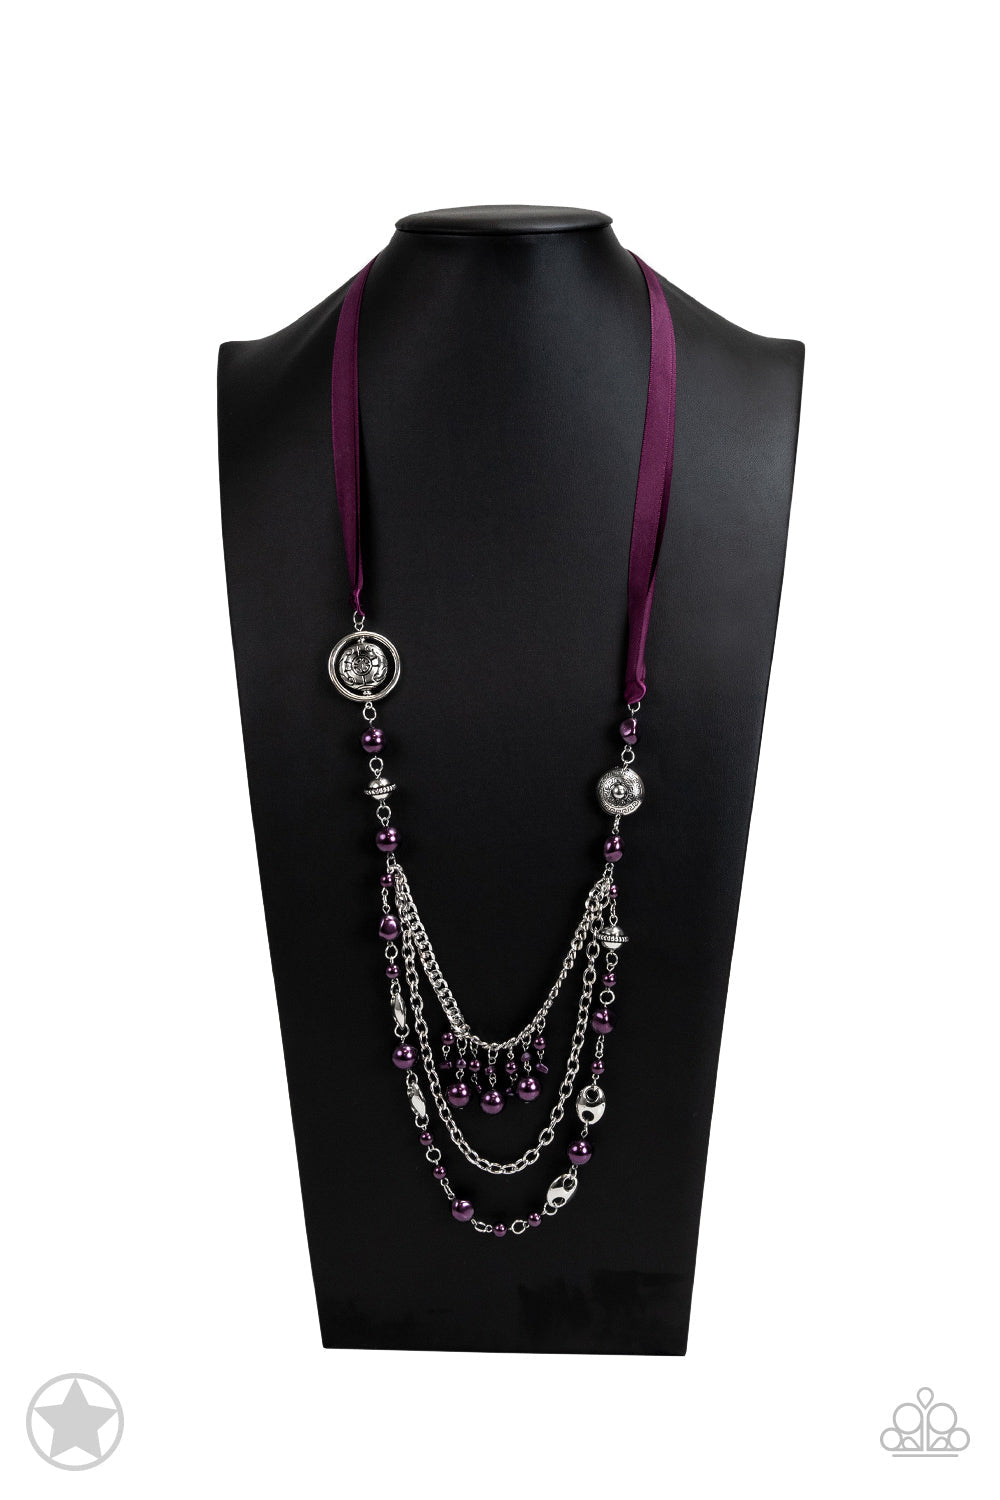 All The Trimmings - Purple and Silver Necklace - Paparazzi Accessories - A silky purple ribbon replaces a traditional chain to create a timeless look. Pearly deep purple beads and funky silver pieces intermix with varying lengths of silver chains to give a fresh take on a Victorian-inspired stylish necklace.